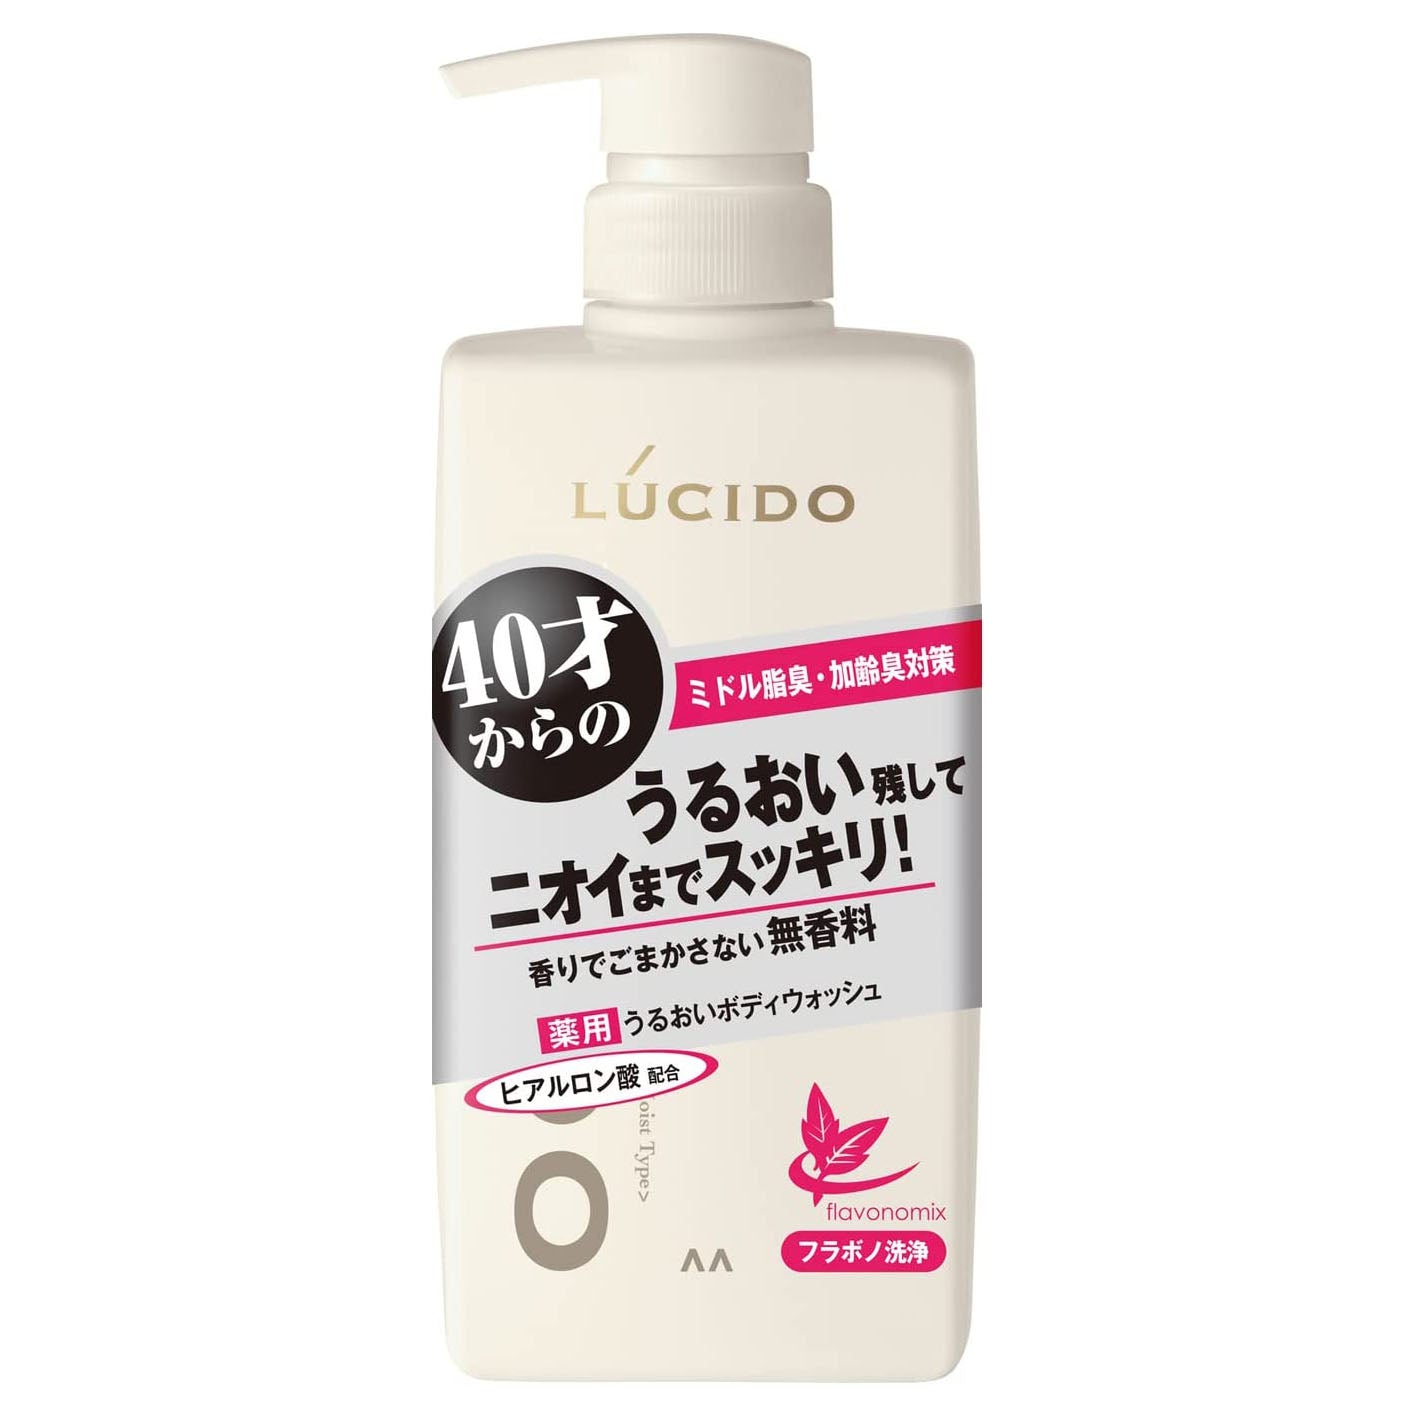 Lucido Medicated deodorant Moisturizing Body Wash 450ml - Harajuku Culture Japan - Japanease Products Store Beauty and Stationery